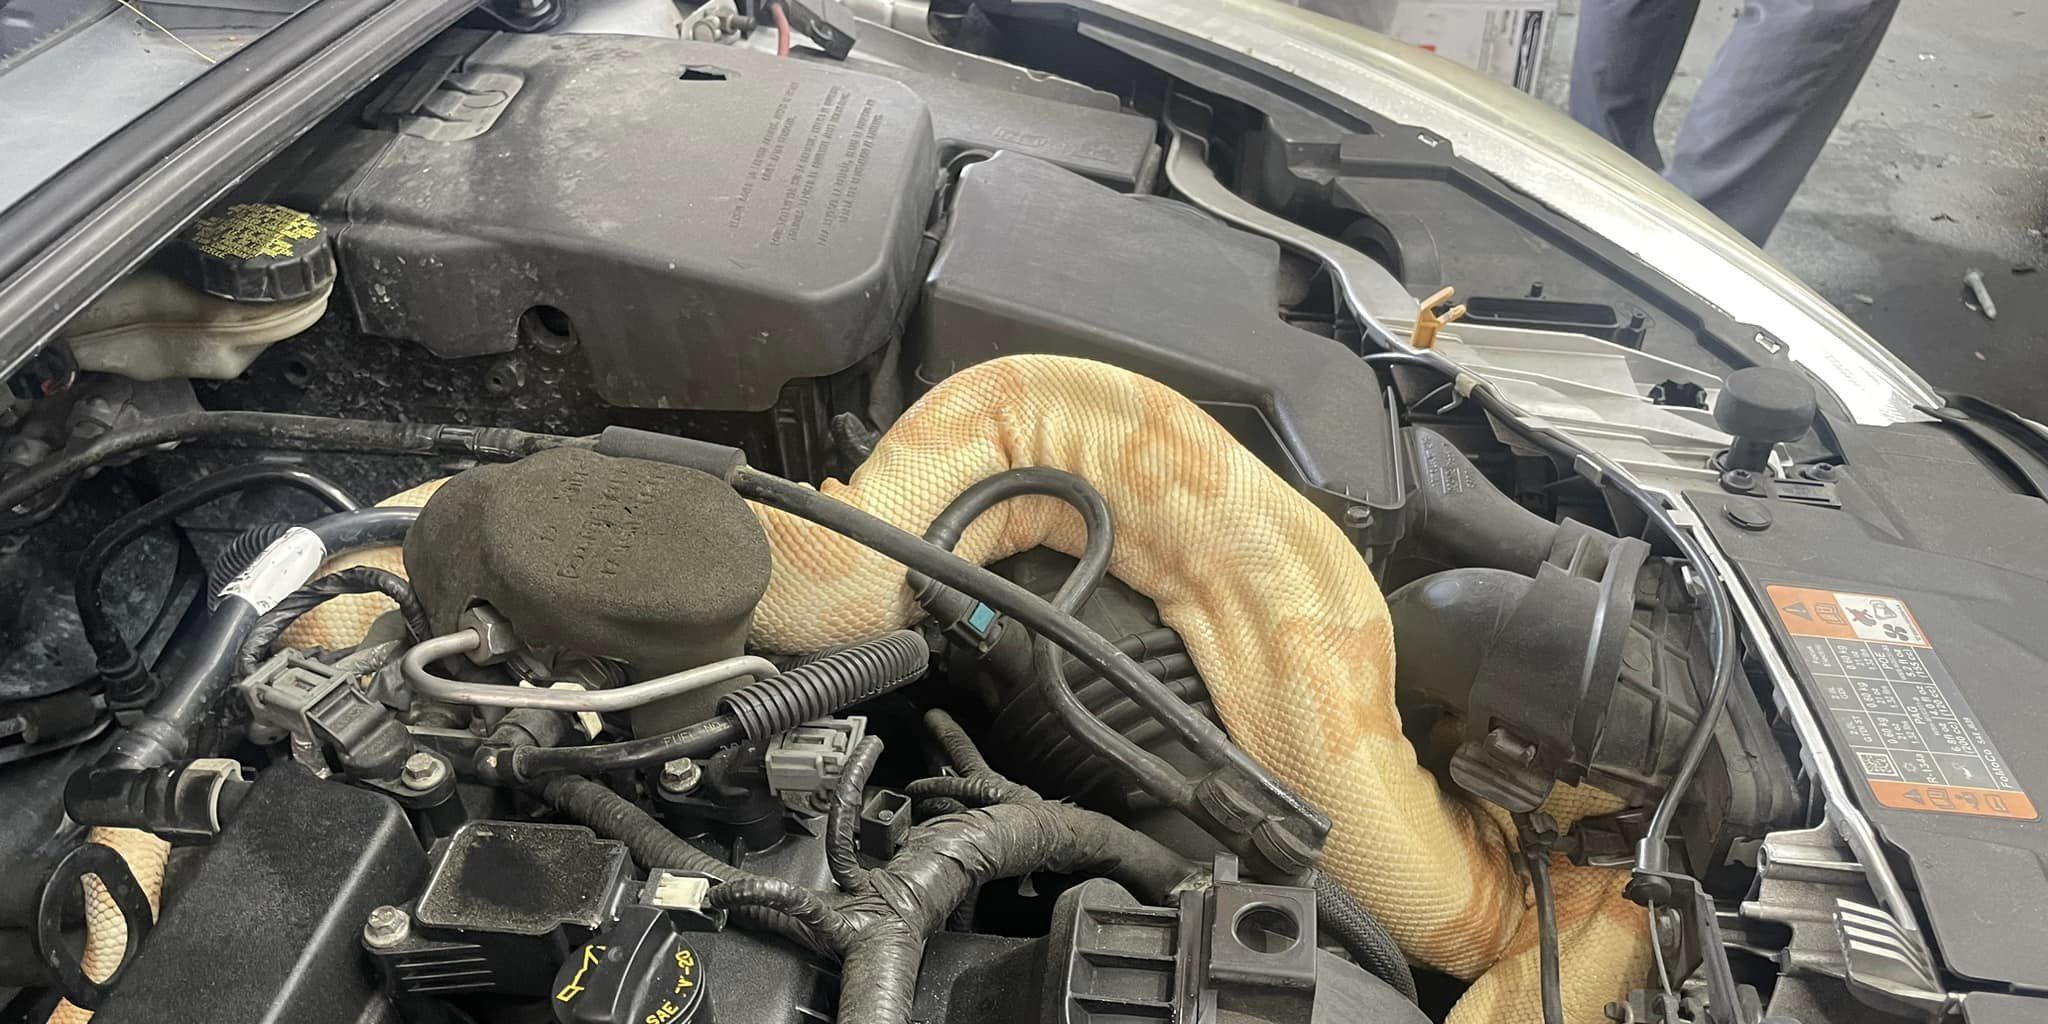 Auto Technicians Find 8-Foot Boa Constrictor Inside Ford Focus